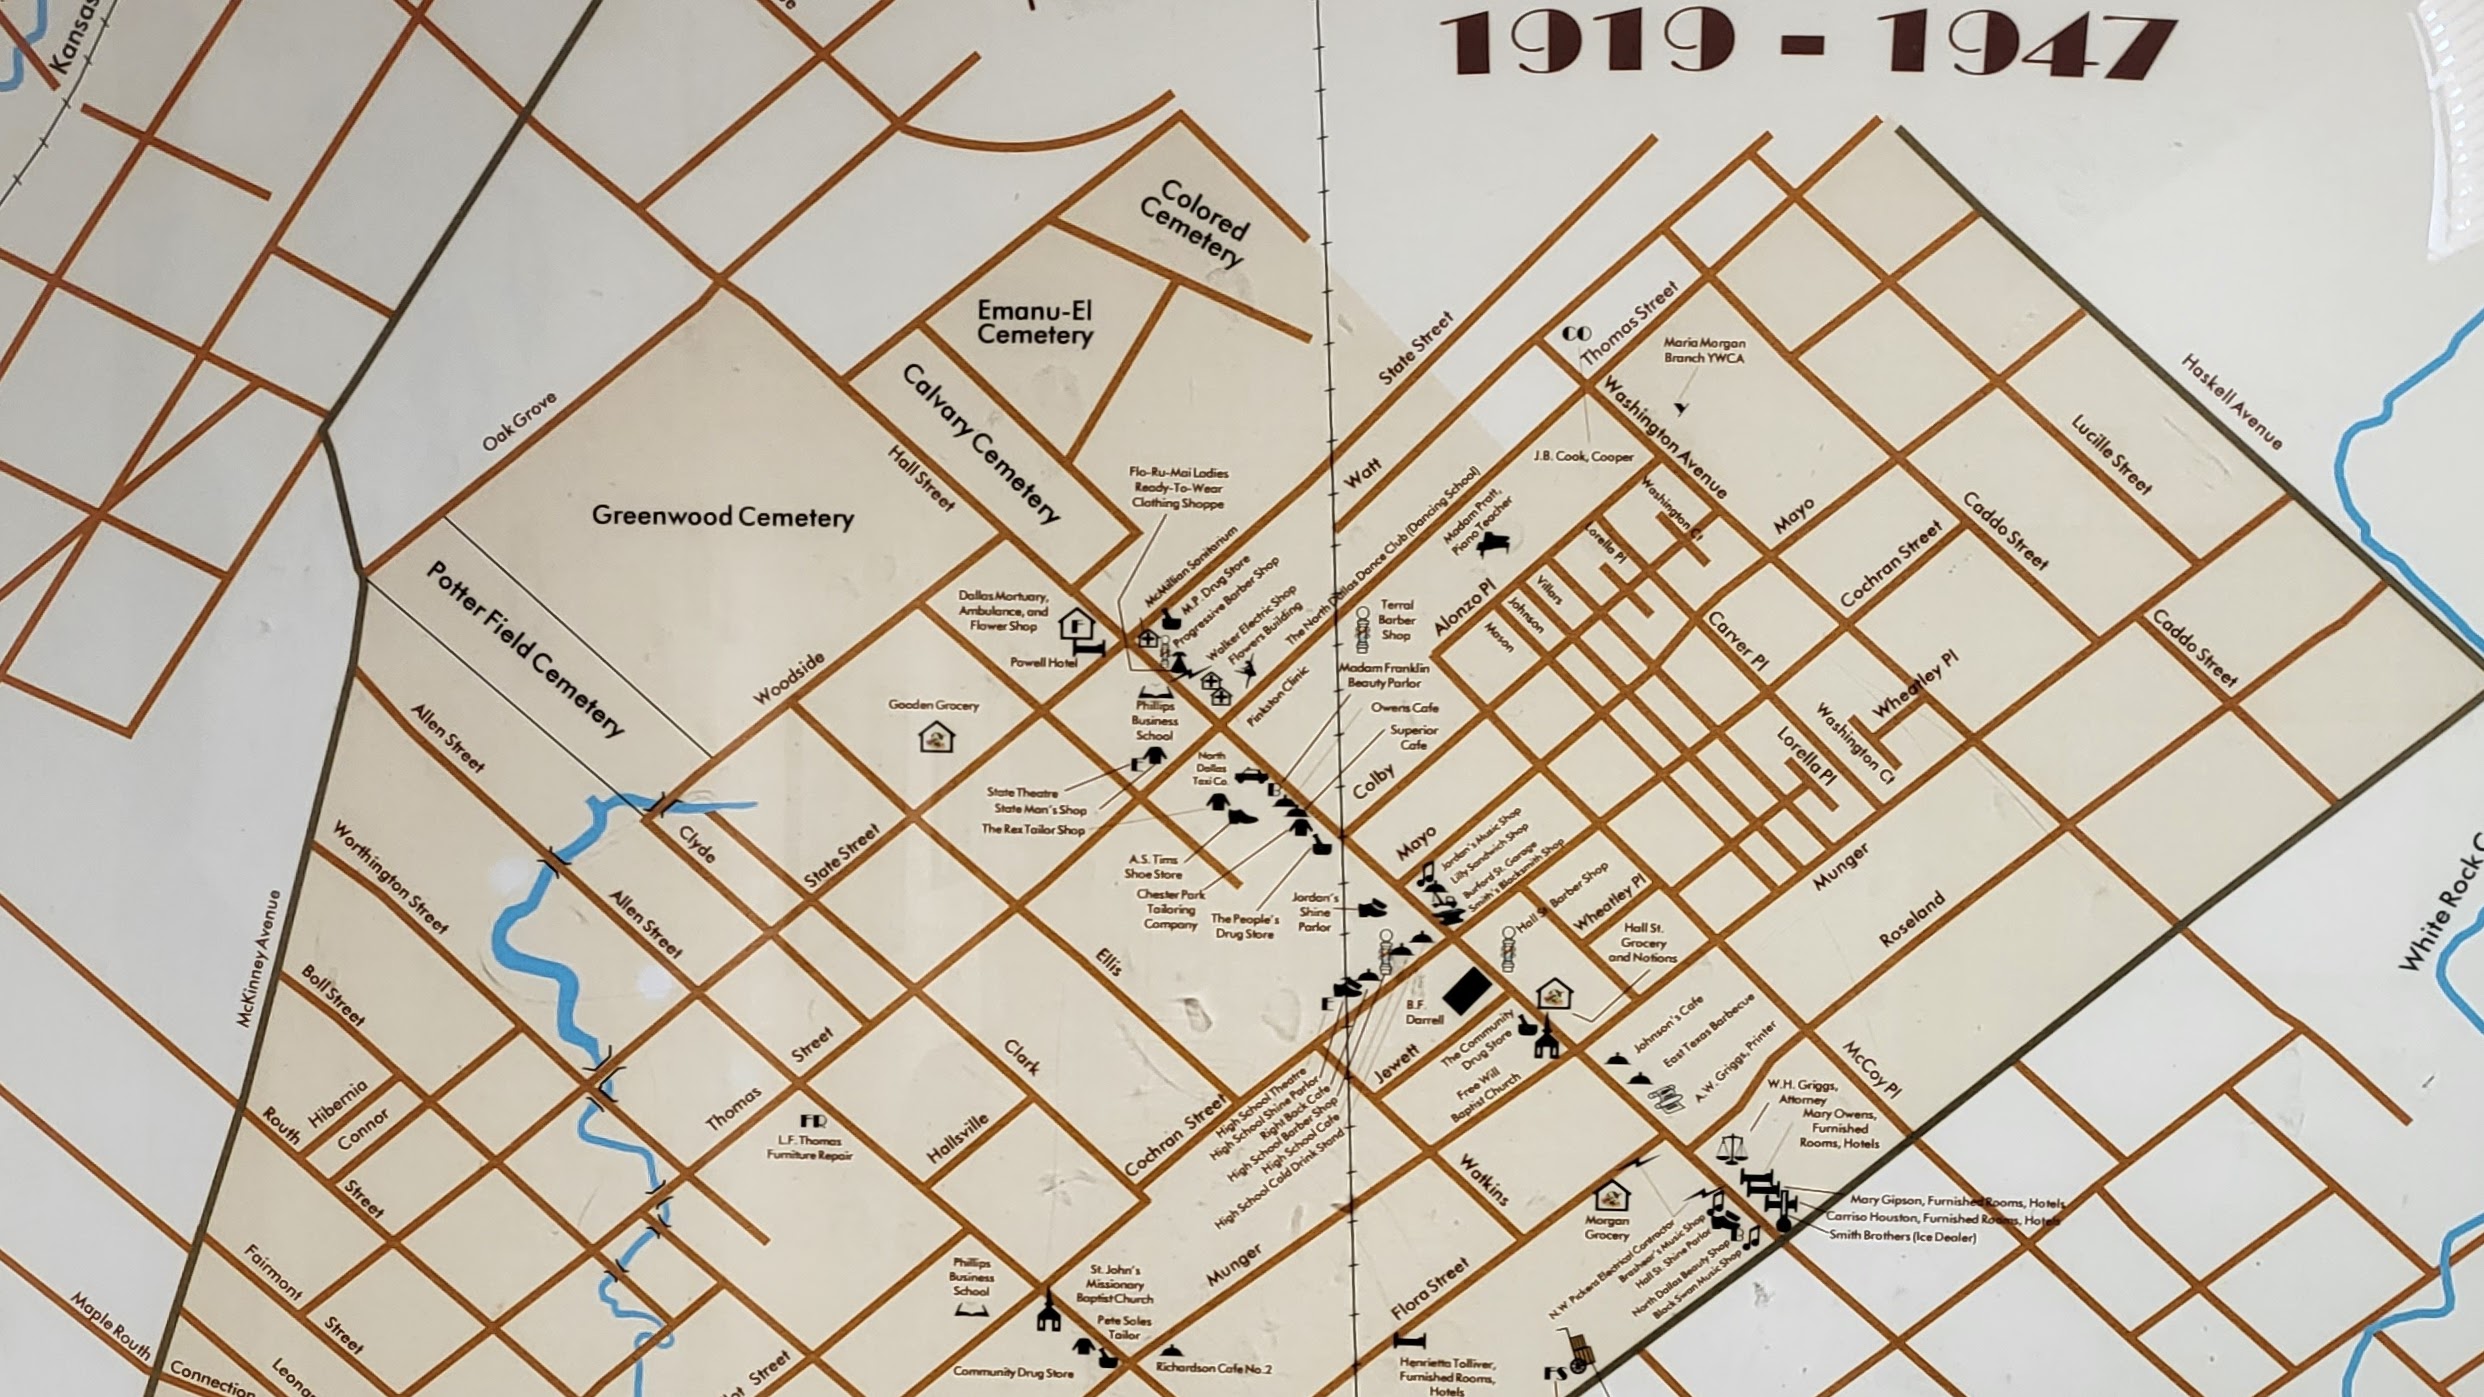 Portion of a map of Freedman Town and North Dallas Communities, 1919 - 1947, on display at the African American Museum of Dallas in Fair Park.